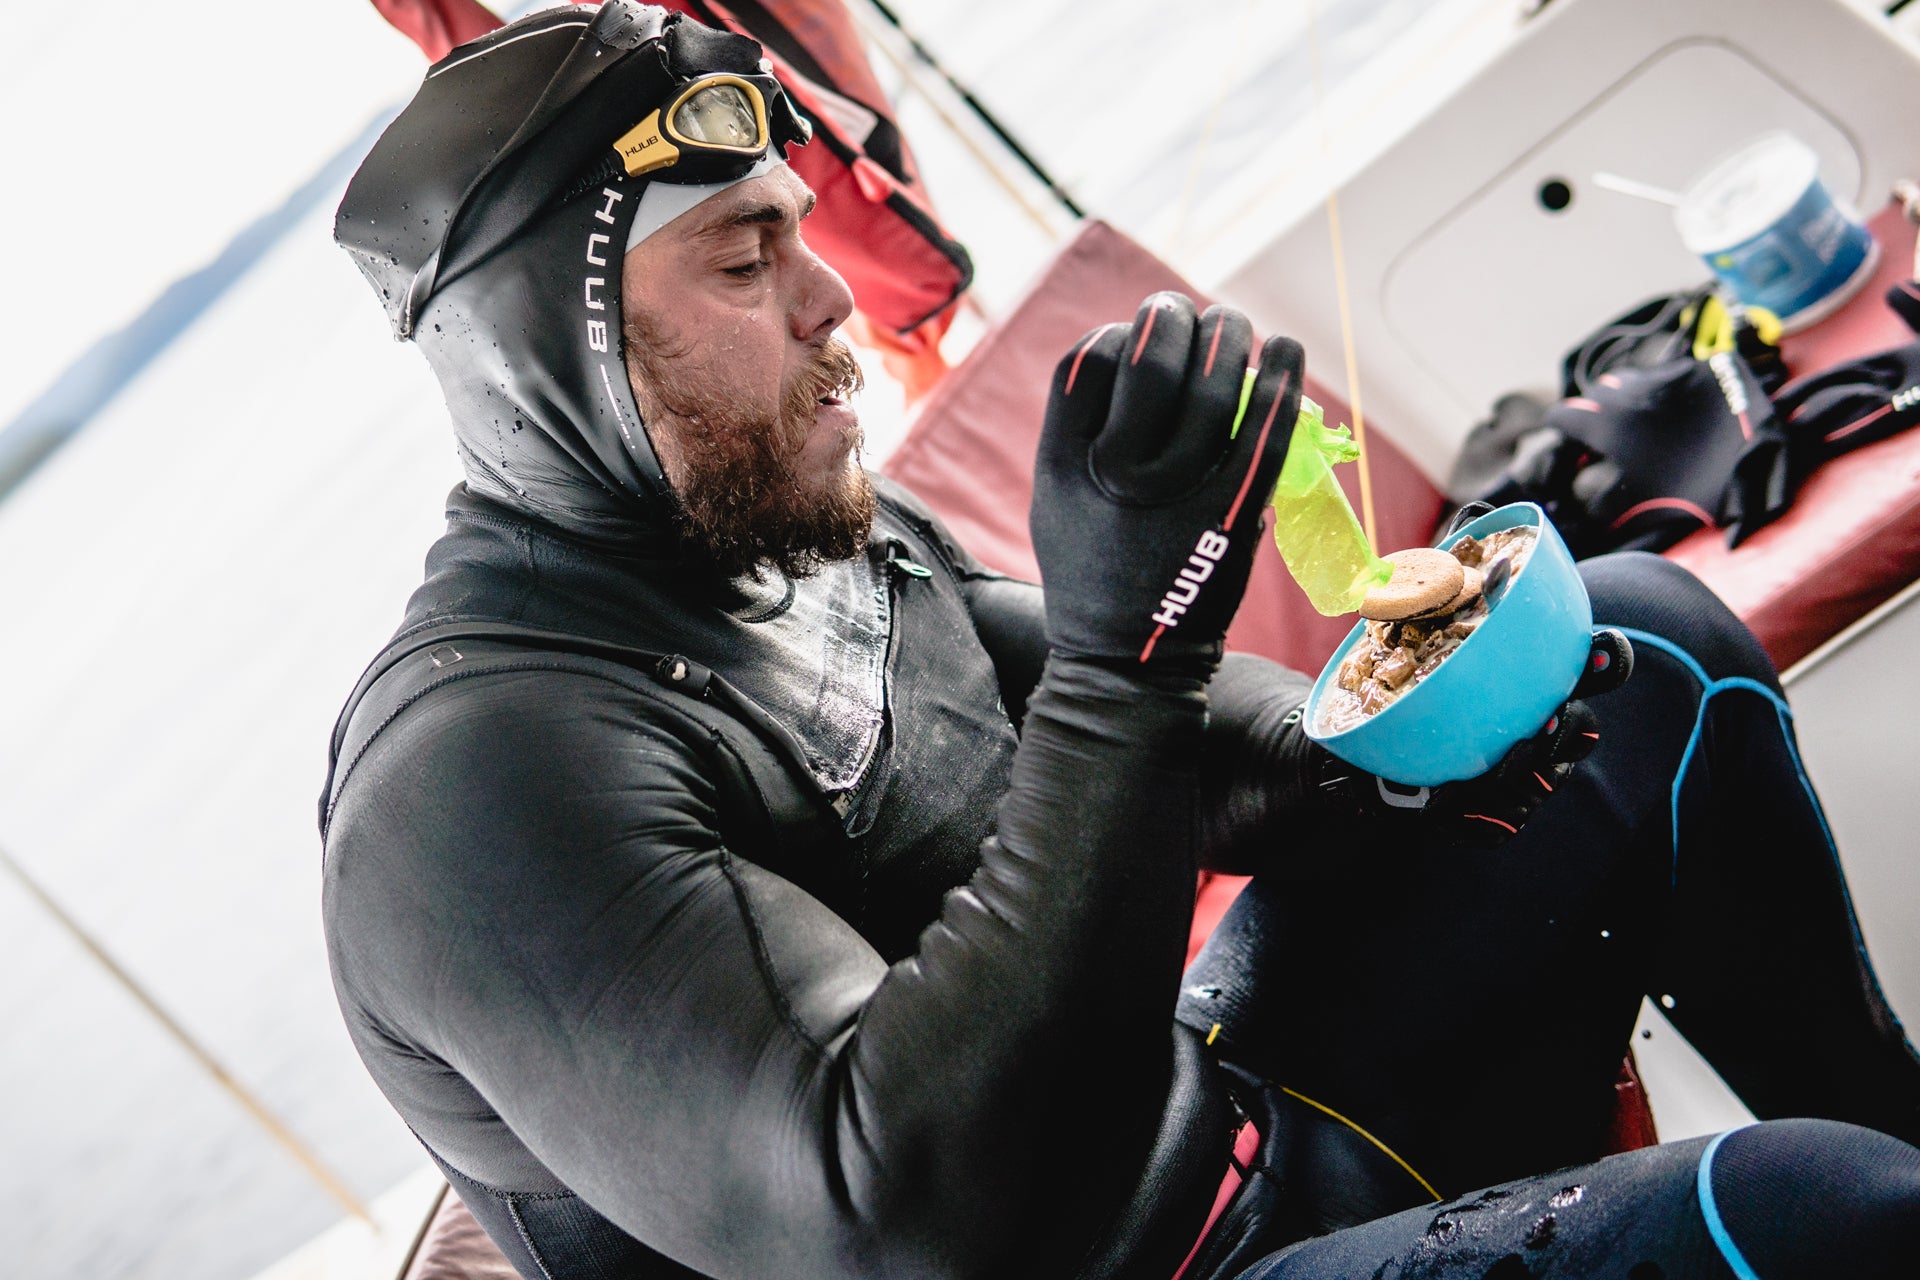 Ross Edgley eating. Image courtesy of Red Bull Content Pool